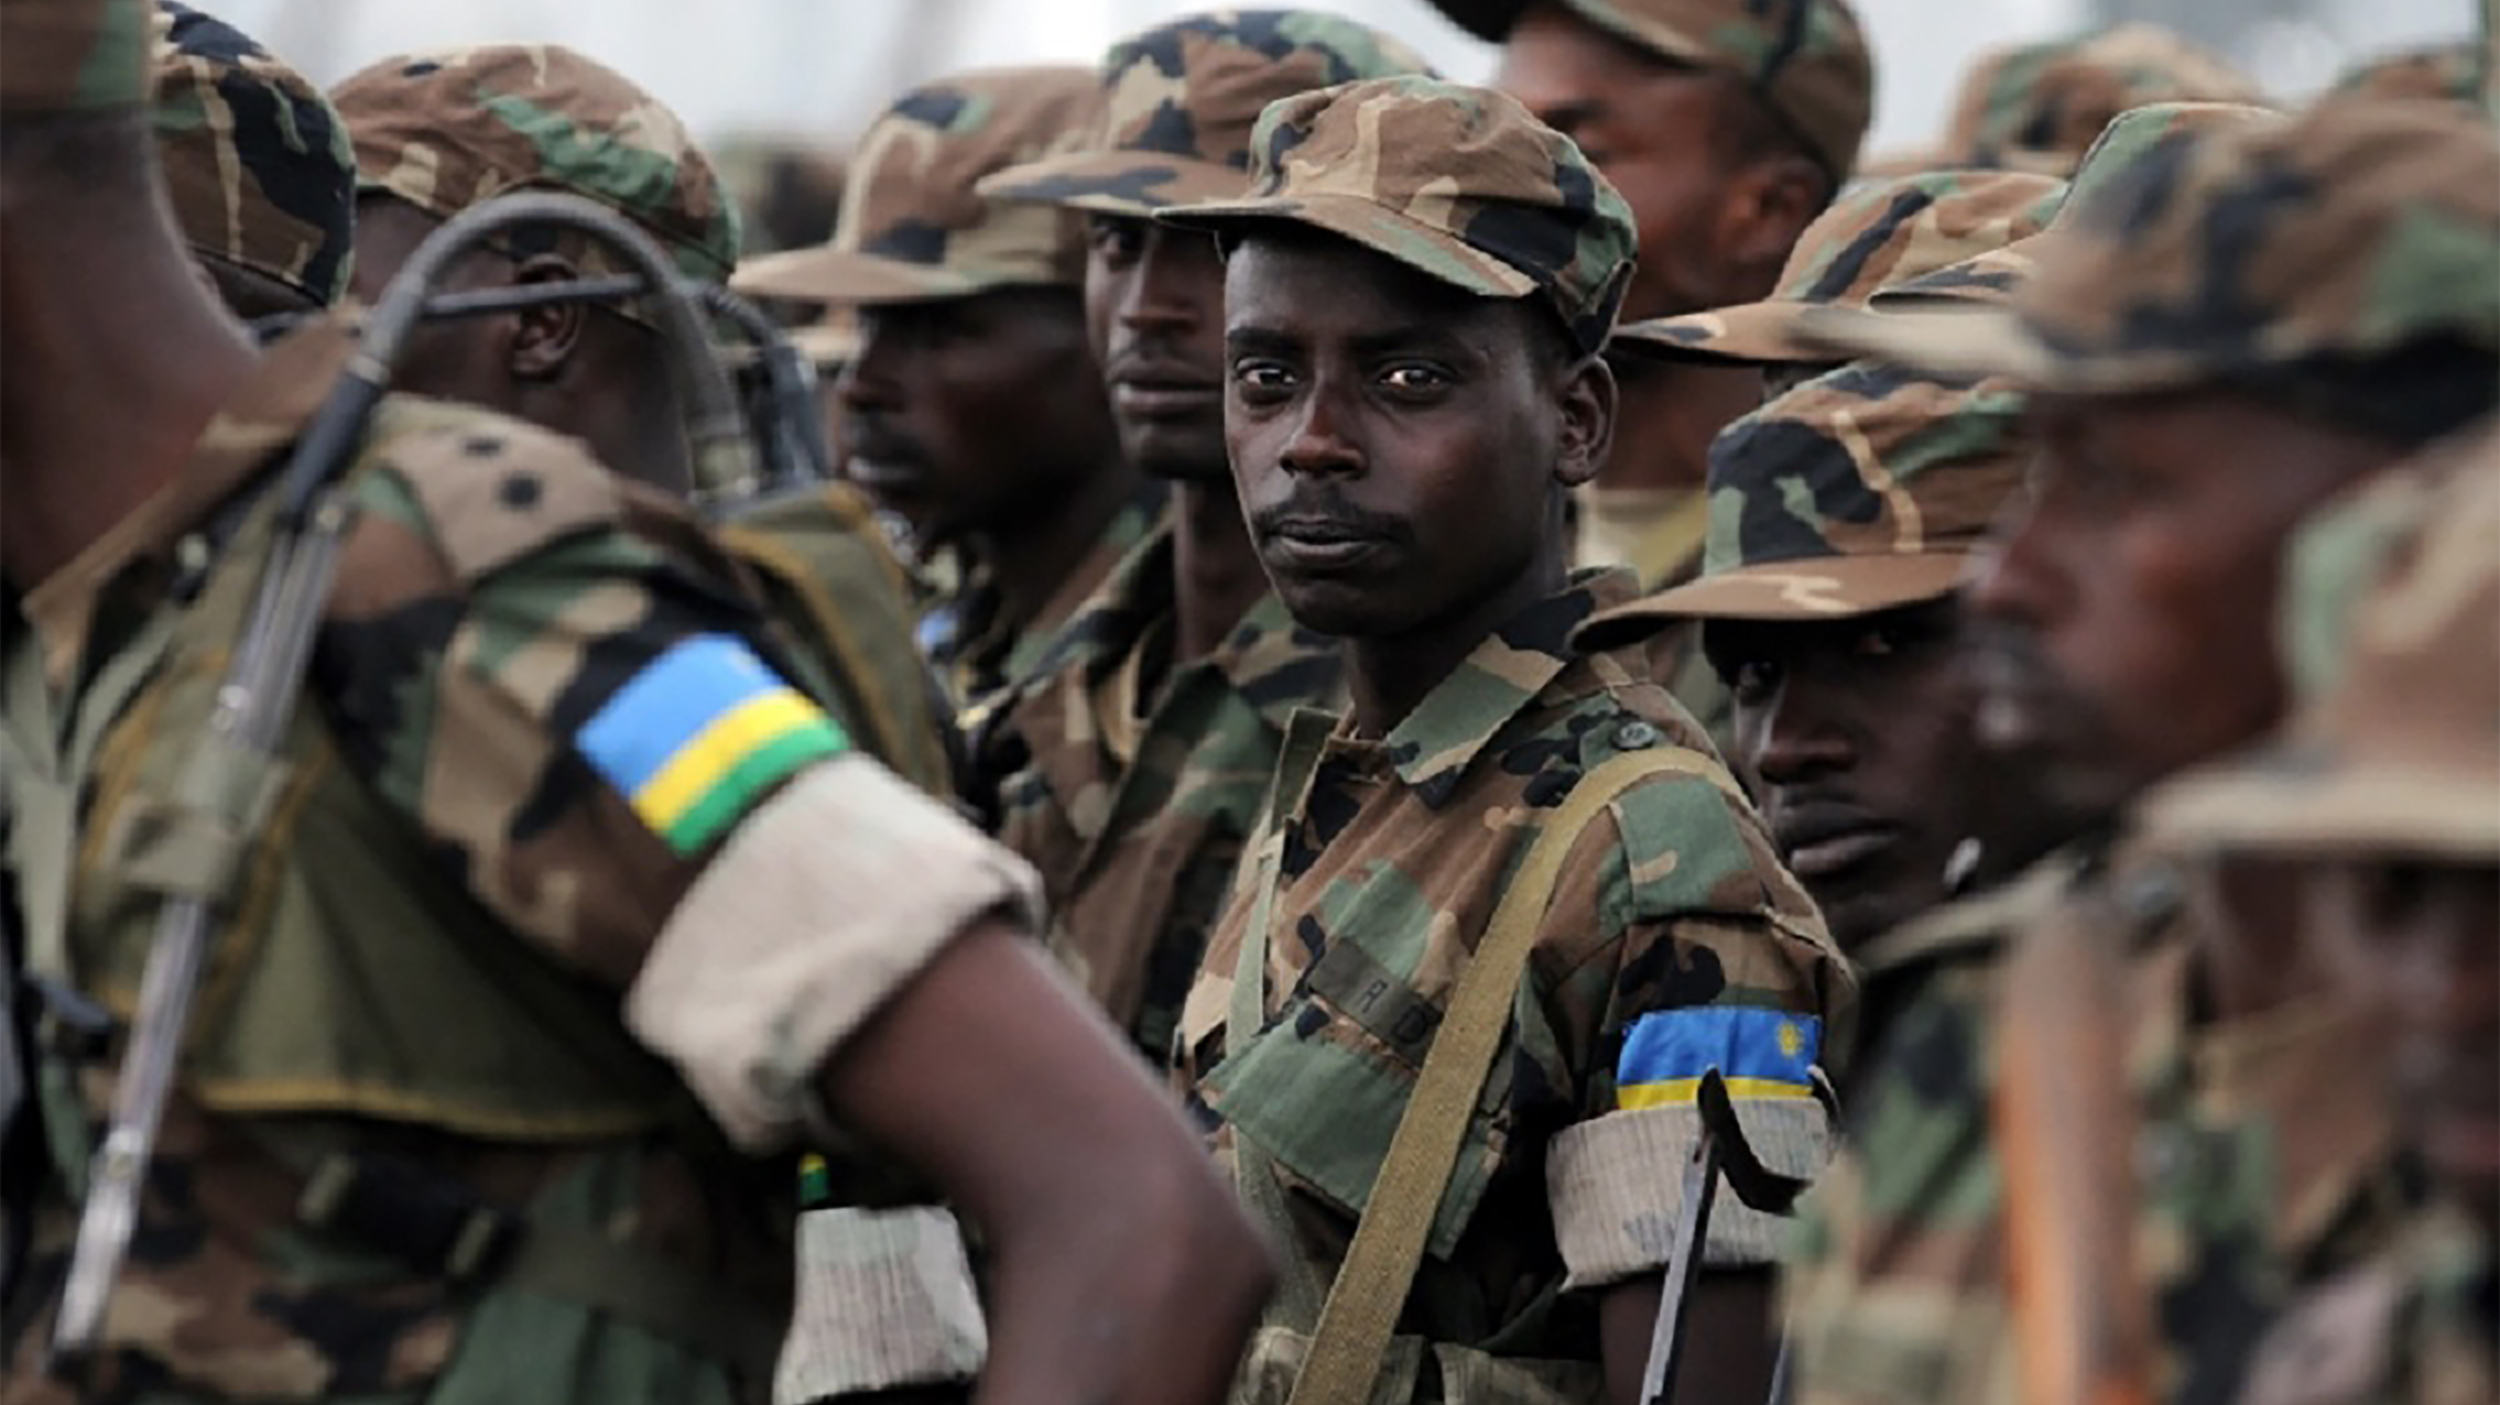 Military diplomacy: How did Rwanda become a country with military influence?